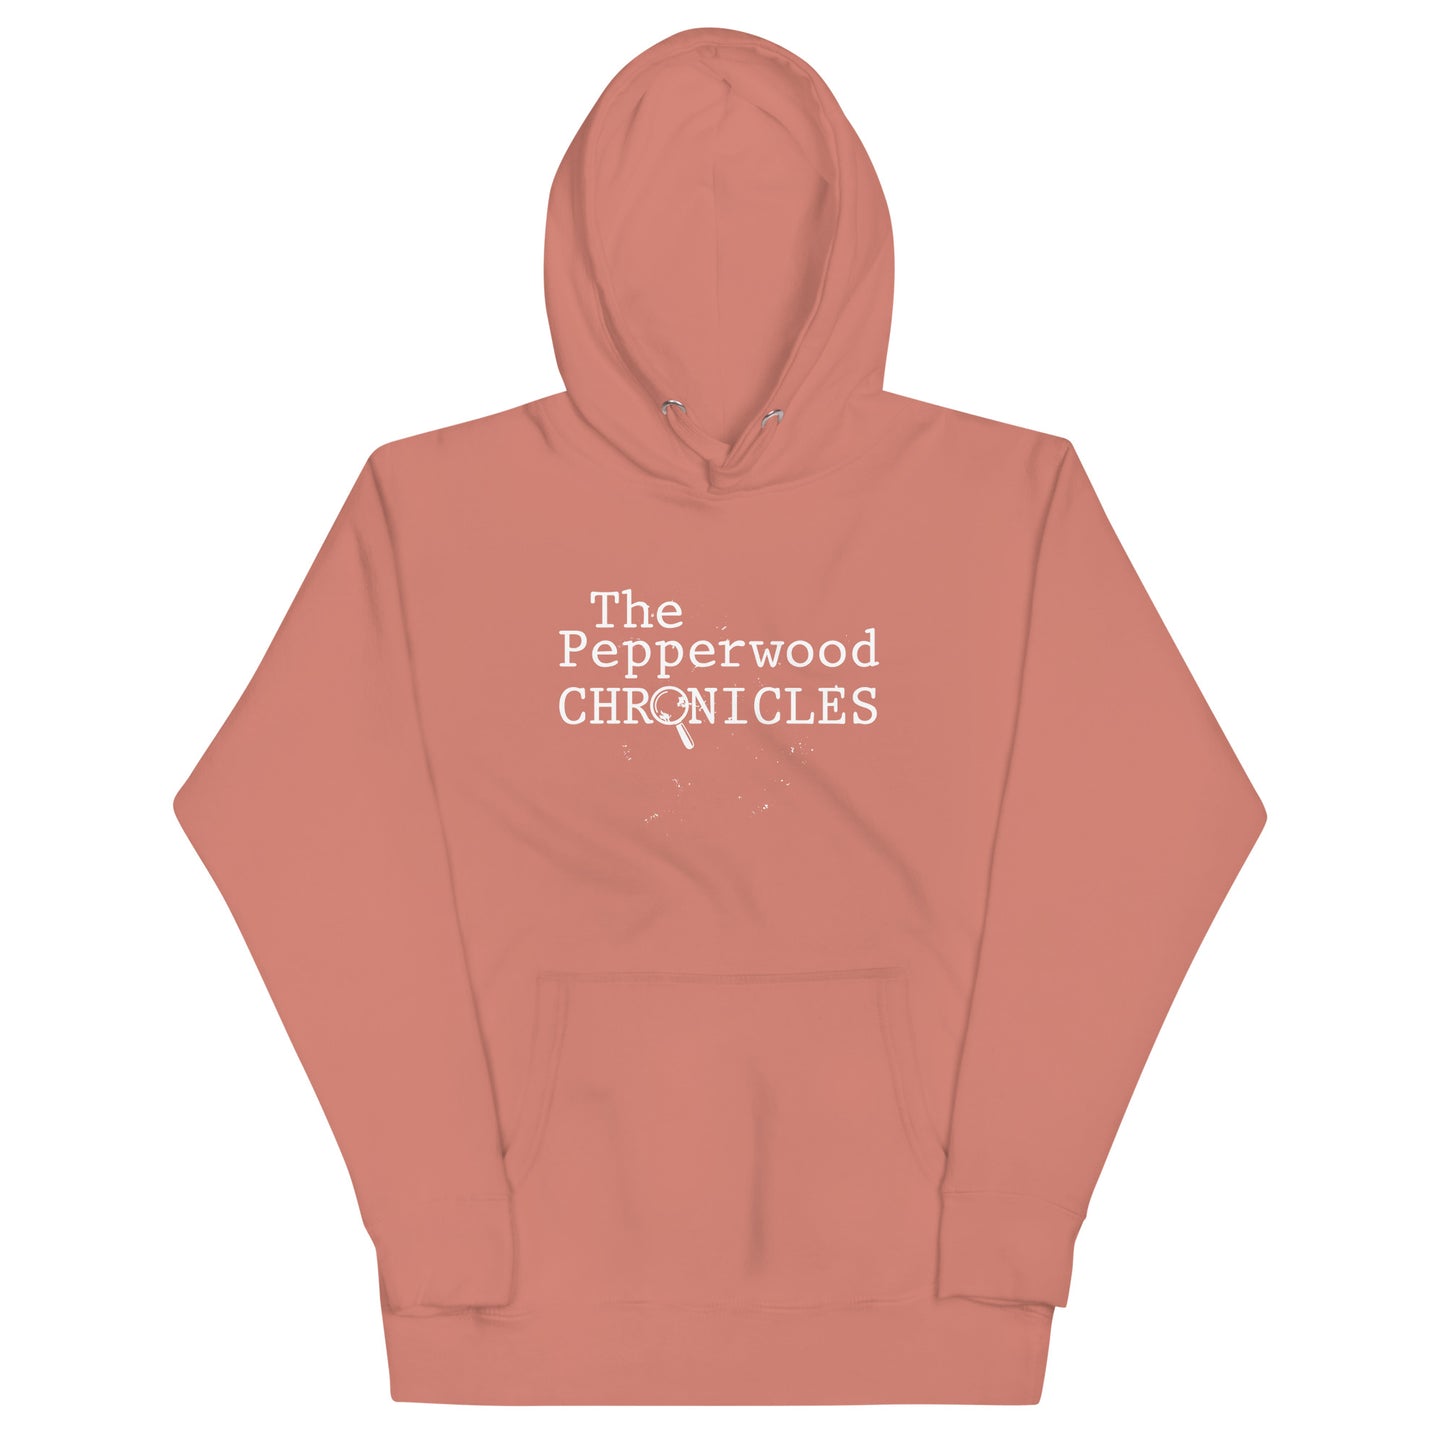 The Pepperwood Chronicles Unisex Hoodie